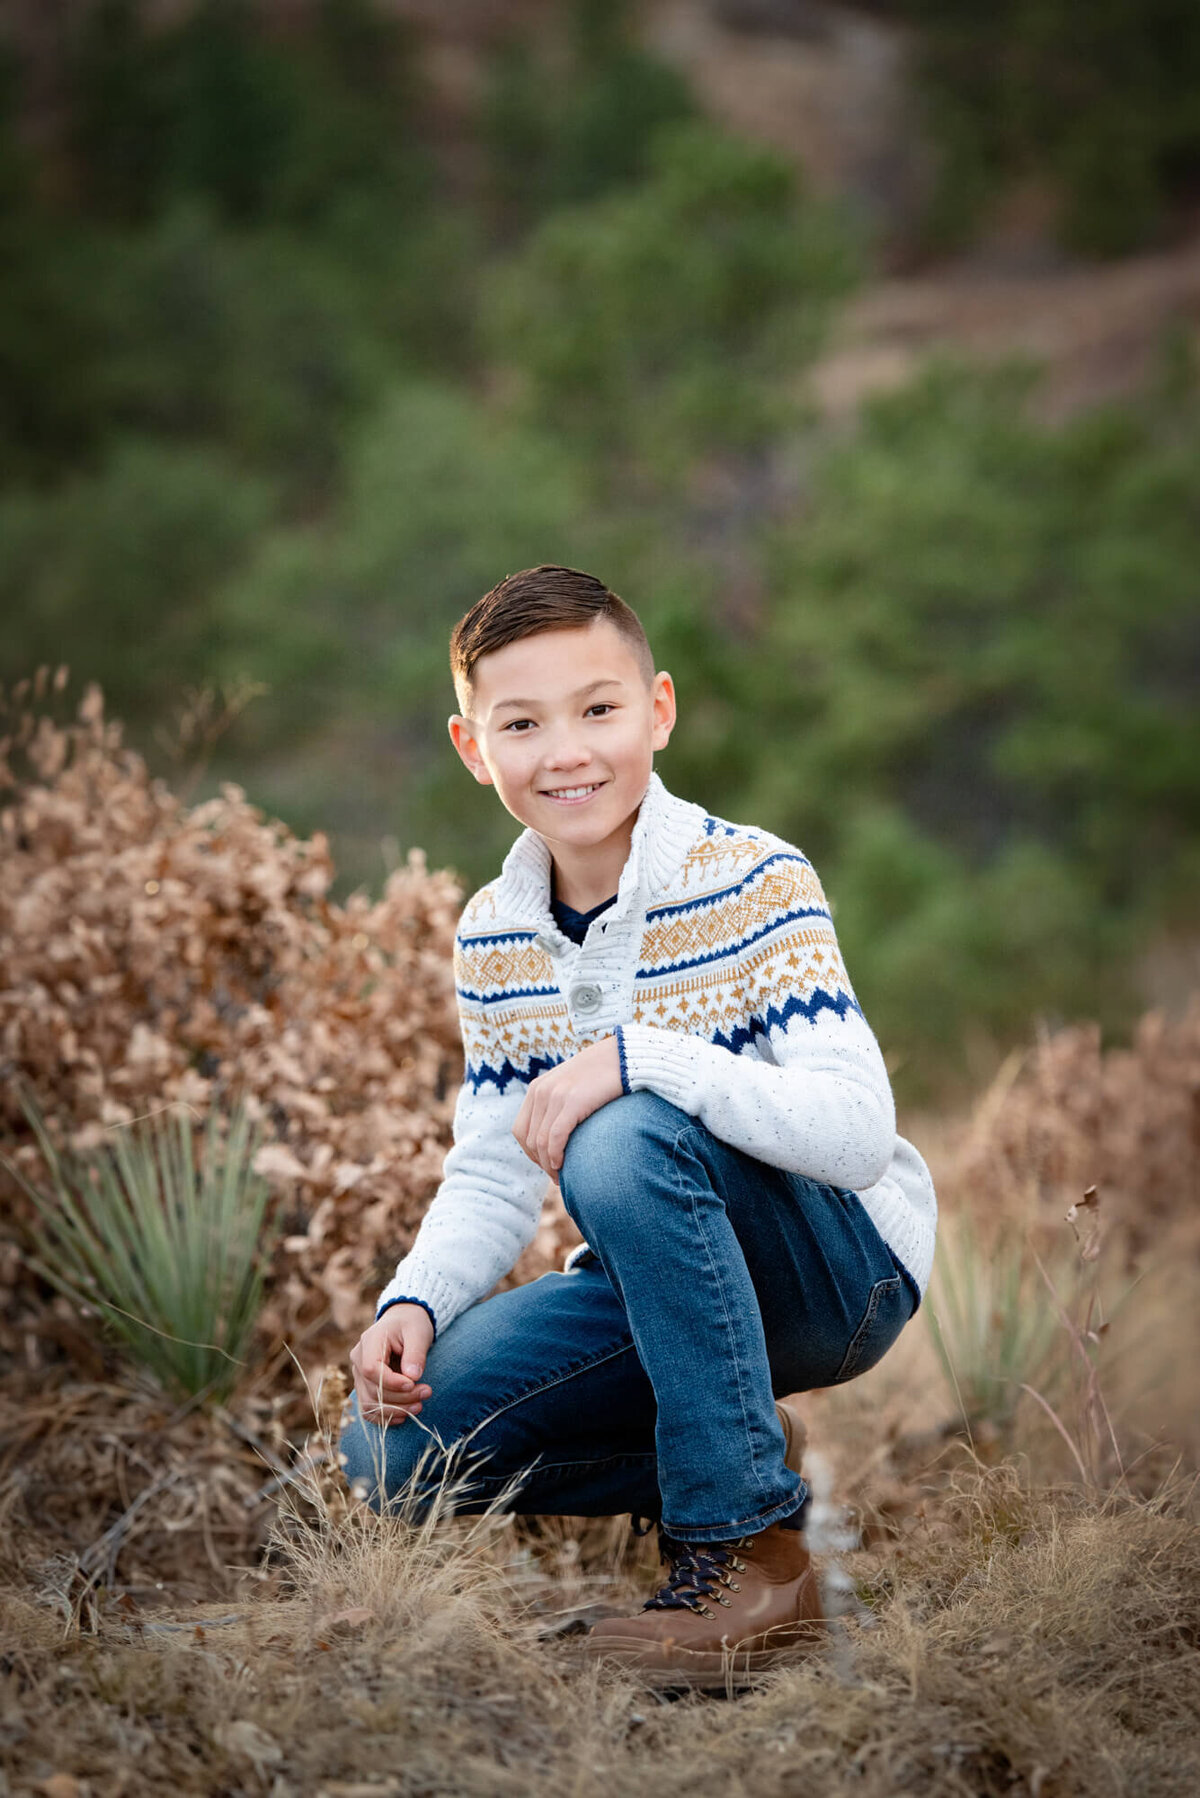 A young boy in a white sweater and jeans kneels in a mountain trail while smiling